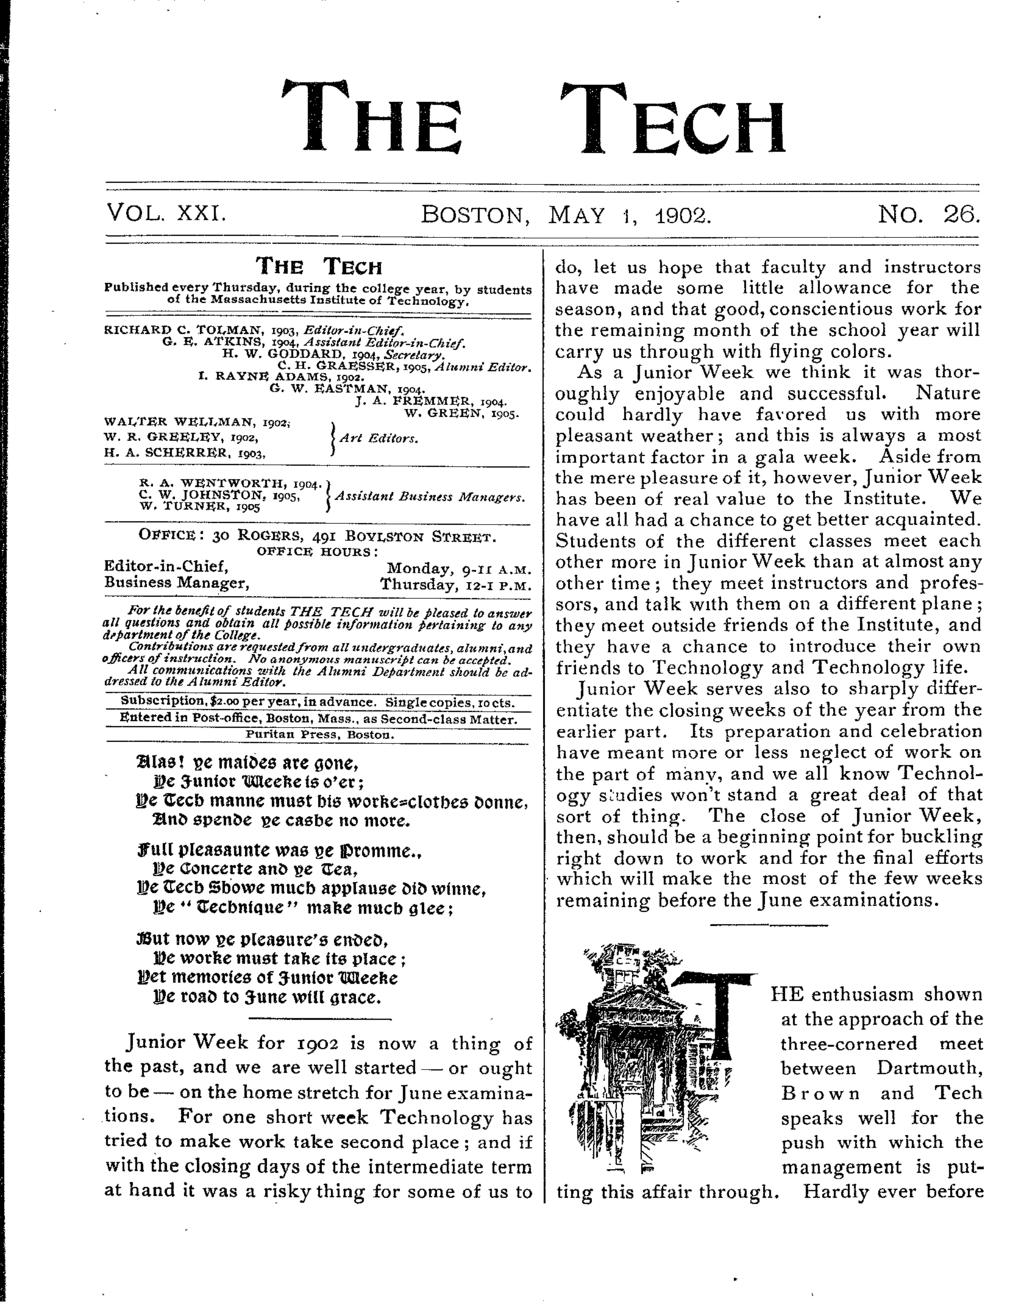 THE TECH VOL. XX. BOSTON, MAY 1, 1902. NO. 26. THE TEcH Publshed every Thursday, durng the college year, by students of the Massachusetts nsttute of Technology. RCHARD C. TOLMAN, 1903, Edtor-n-Chef.